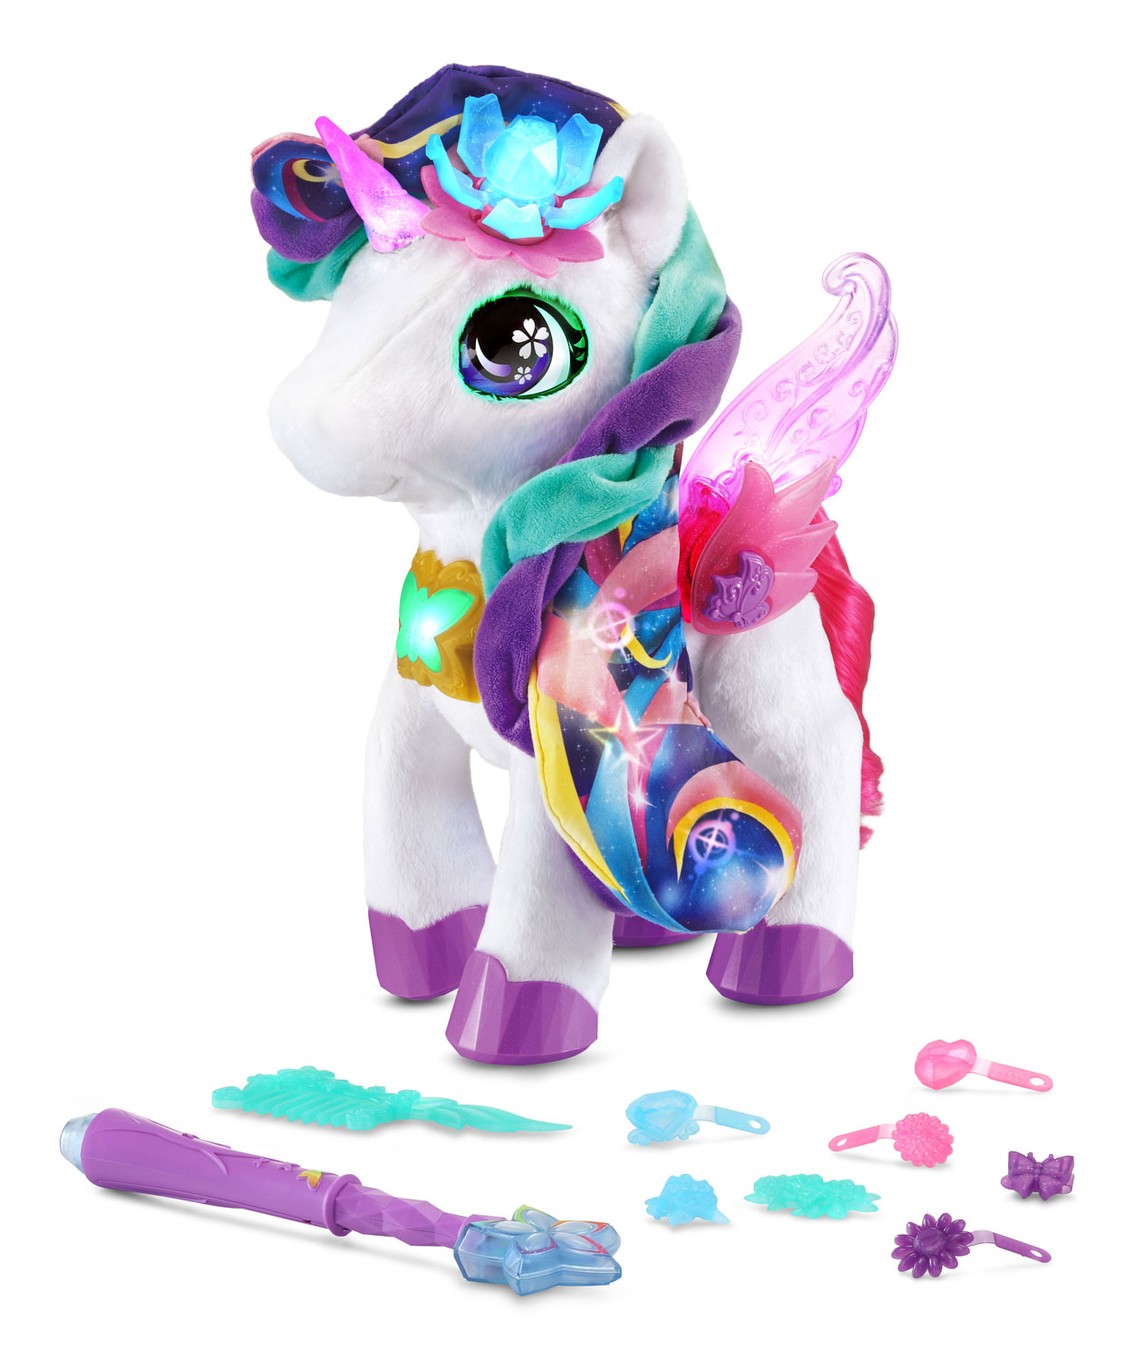 Bright Starts Rock & Glow Unicorn Toy with Lights and Melodies, Ages 6  months +